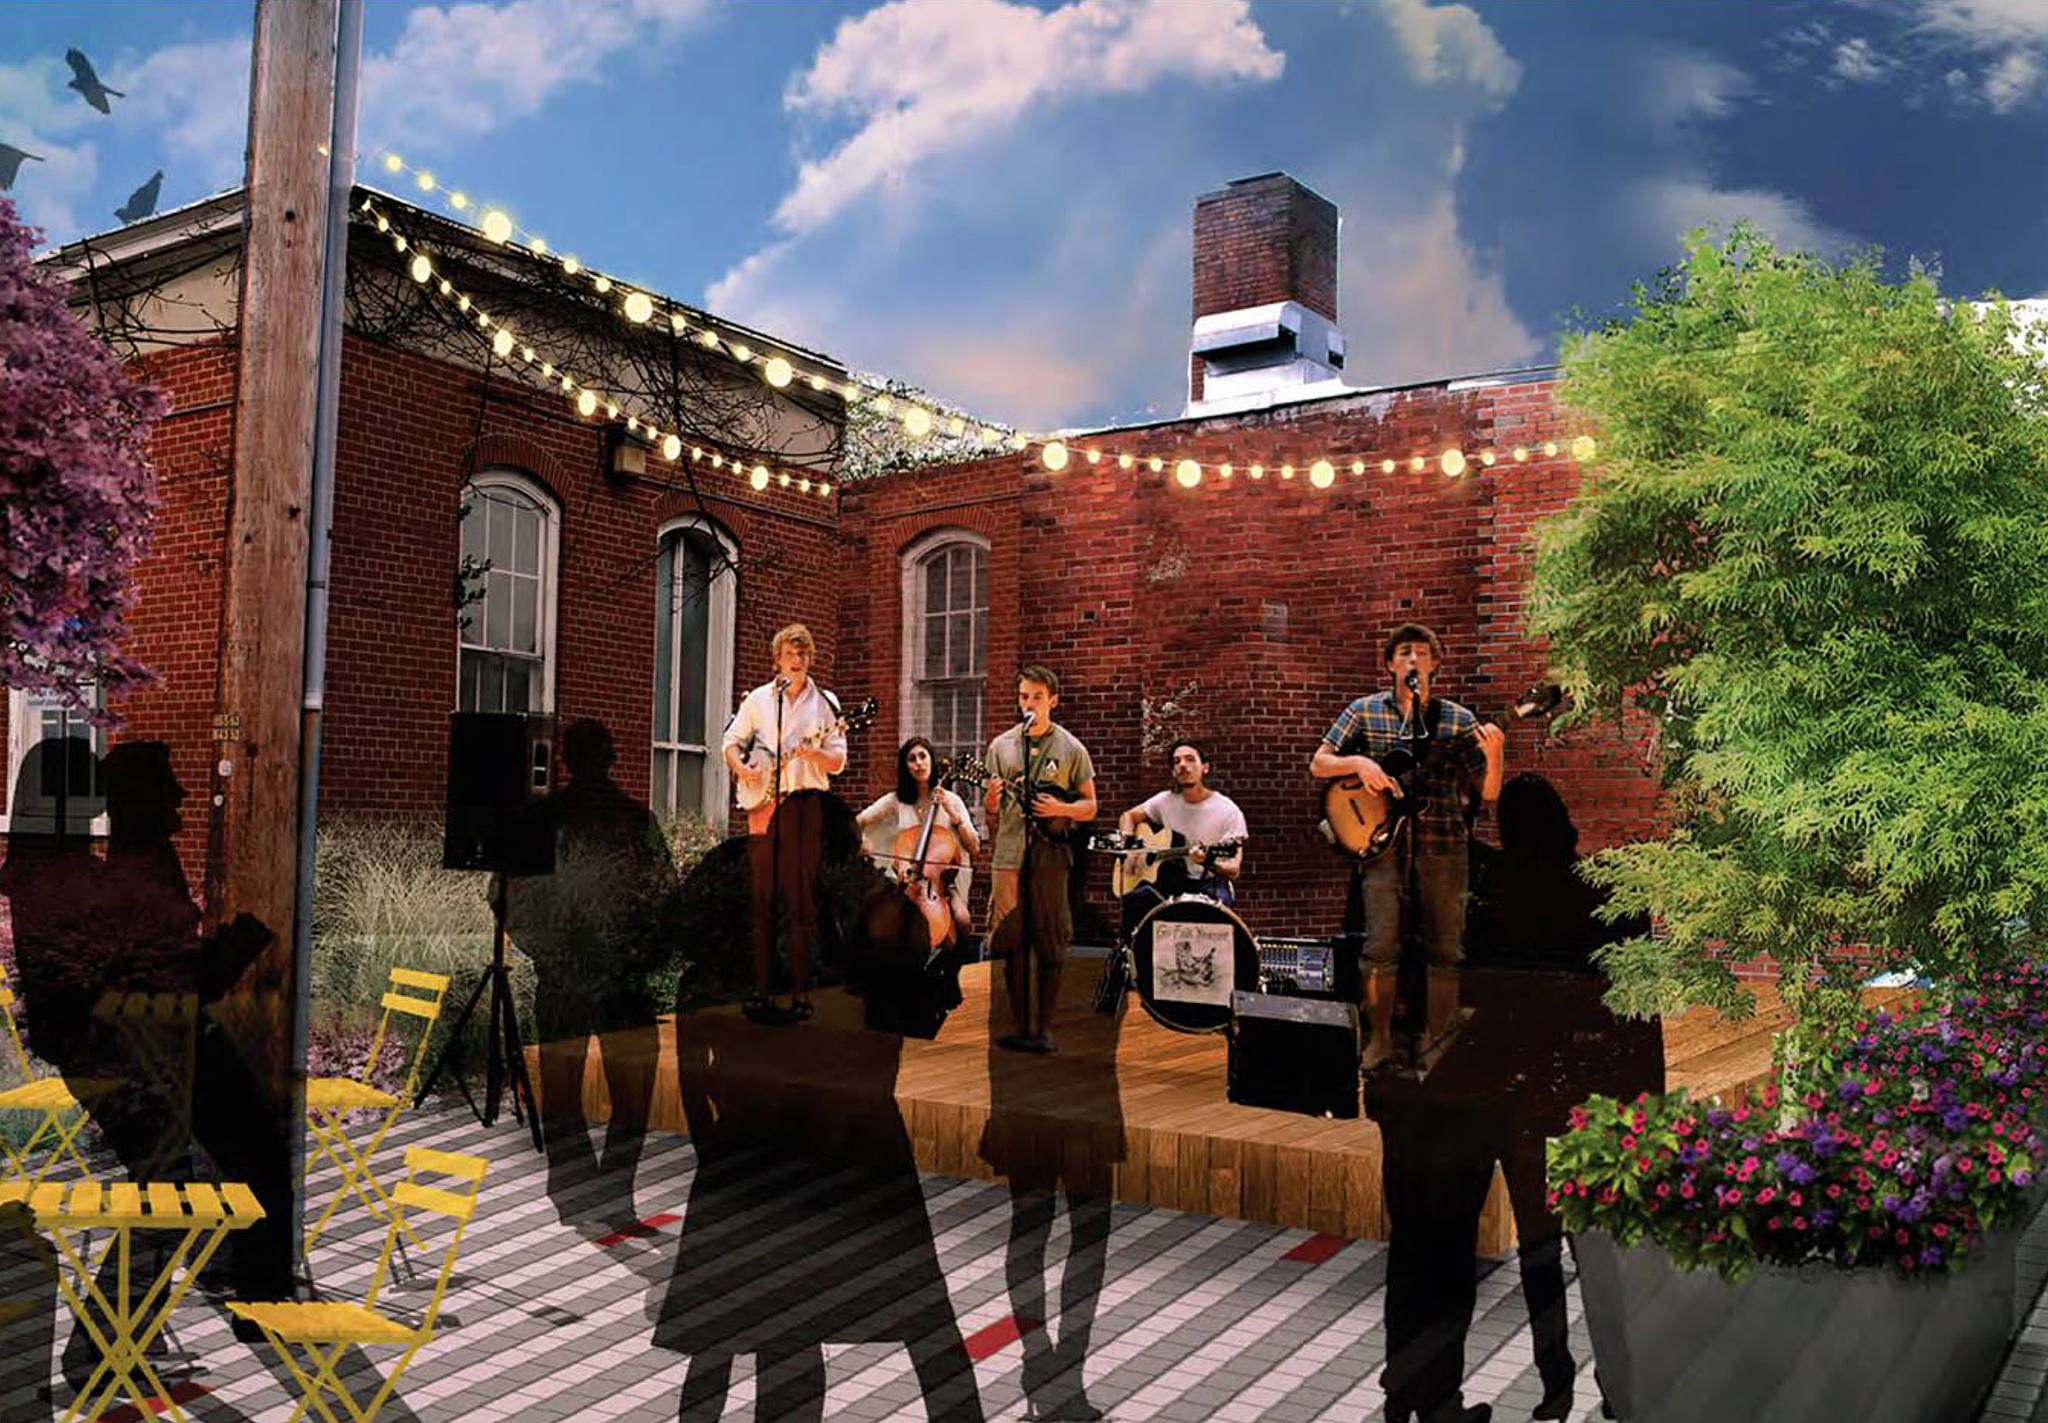 The idea of having a low stage or raised platform around the rear of the Arts Culture Center could provide a place for performances to take place and also a charming, raised seating area the rest of the year. COURTESY RENDERING, City of Auburn